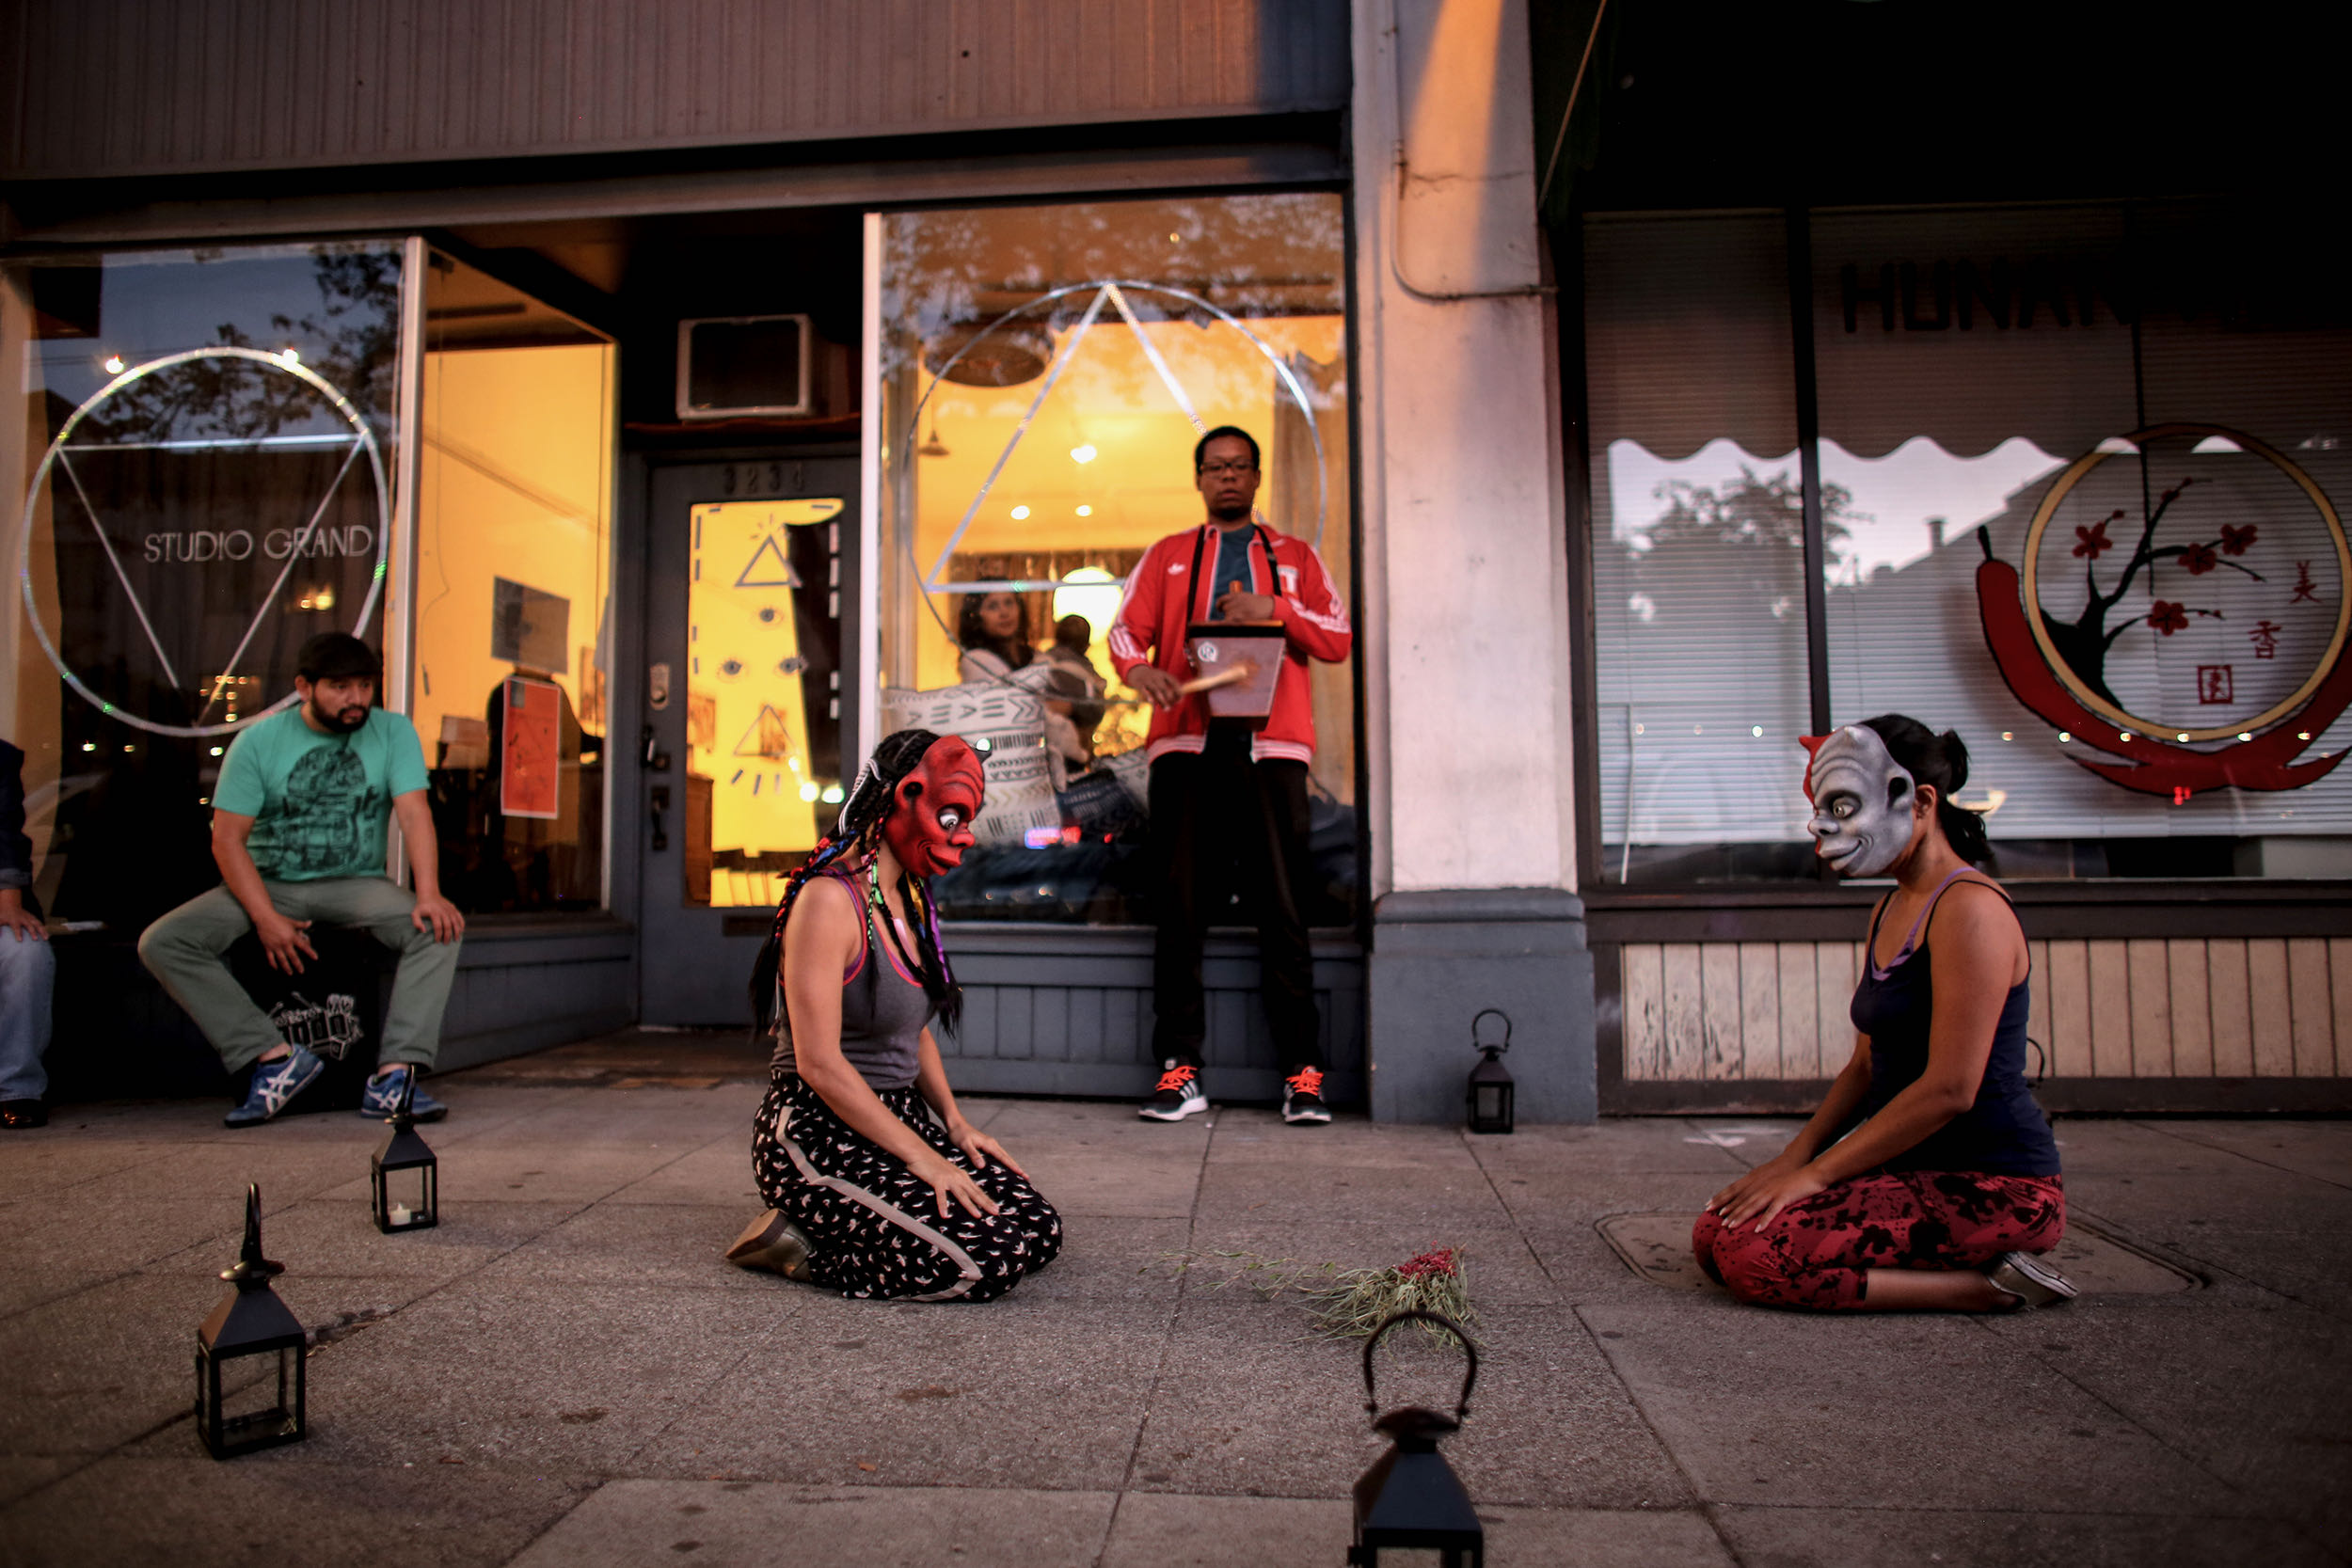 Two dancers in masks kneel on the sidewalk. Behind them a woman holding a baby, a man with a cajita, and another with a Cajon.